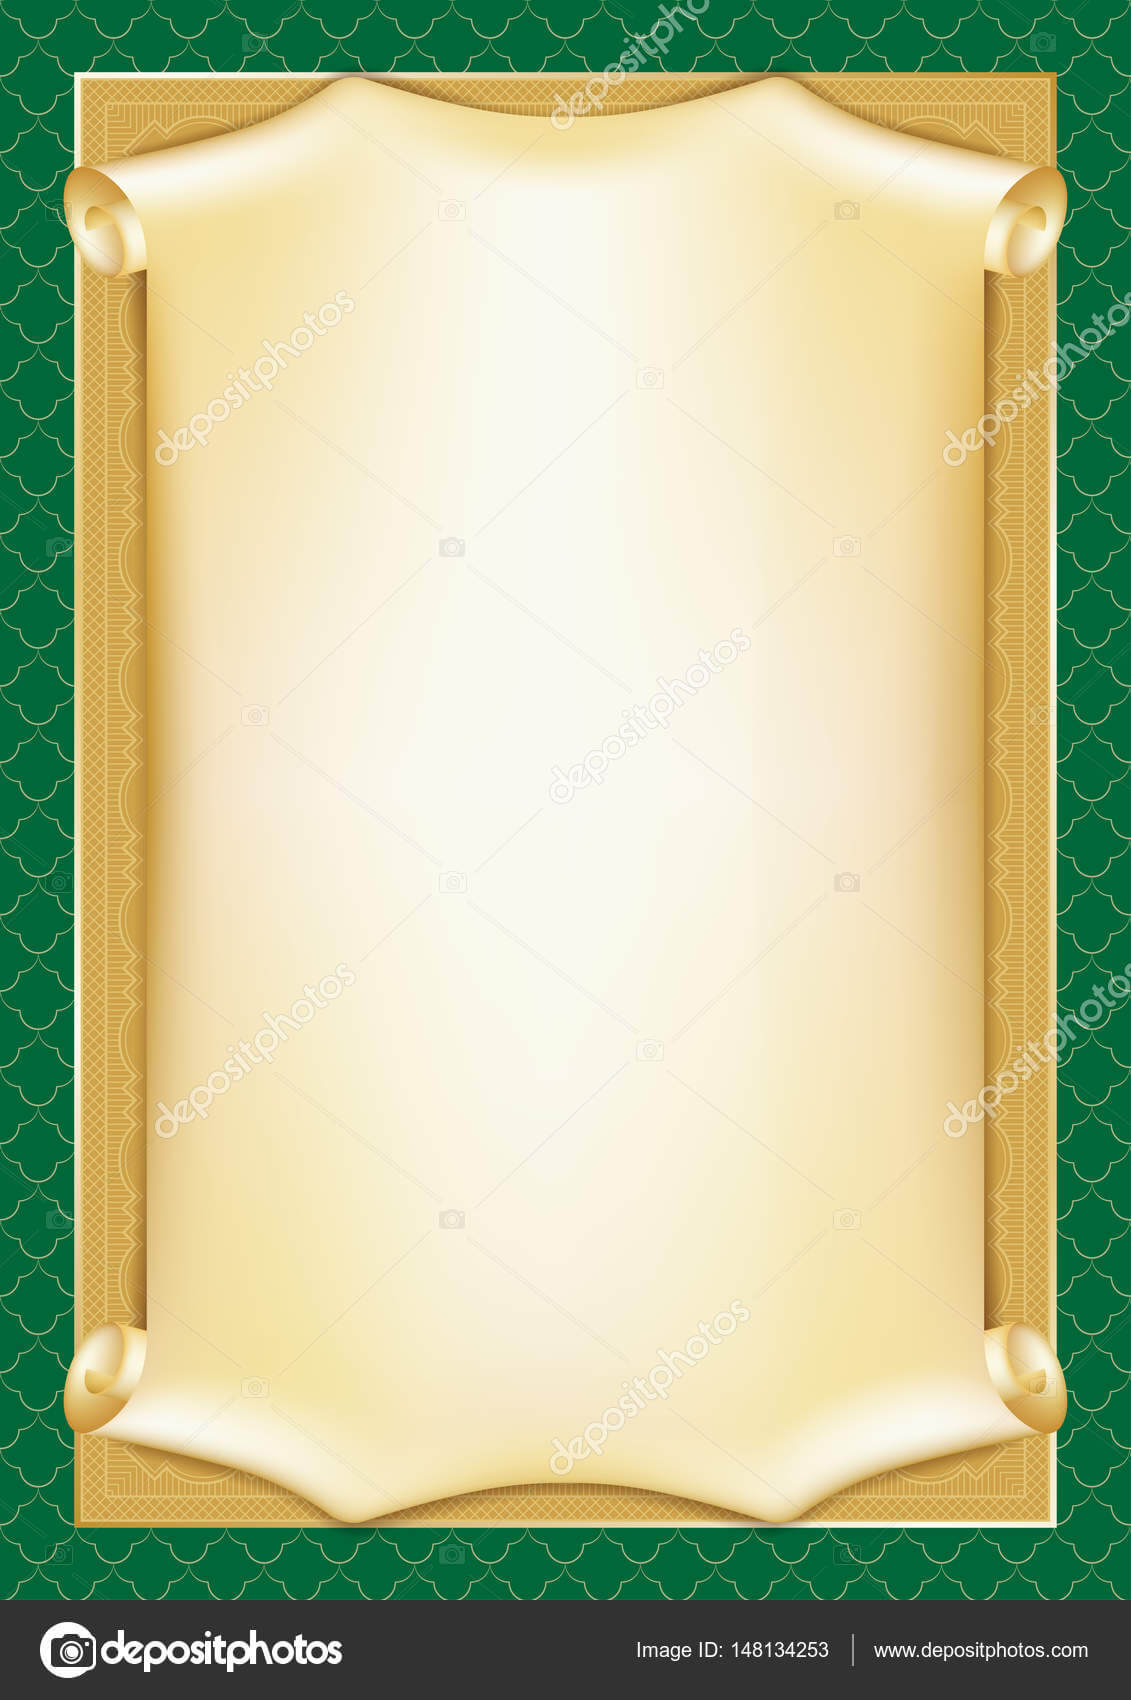 Template For Diploma, Certificate, Card With Scroll And Throughout Certificate Scroll Template